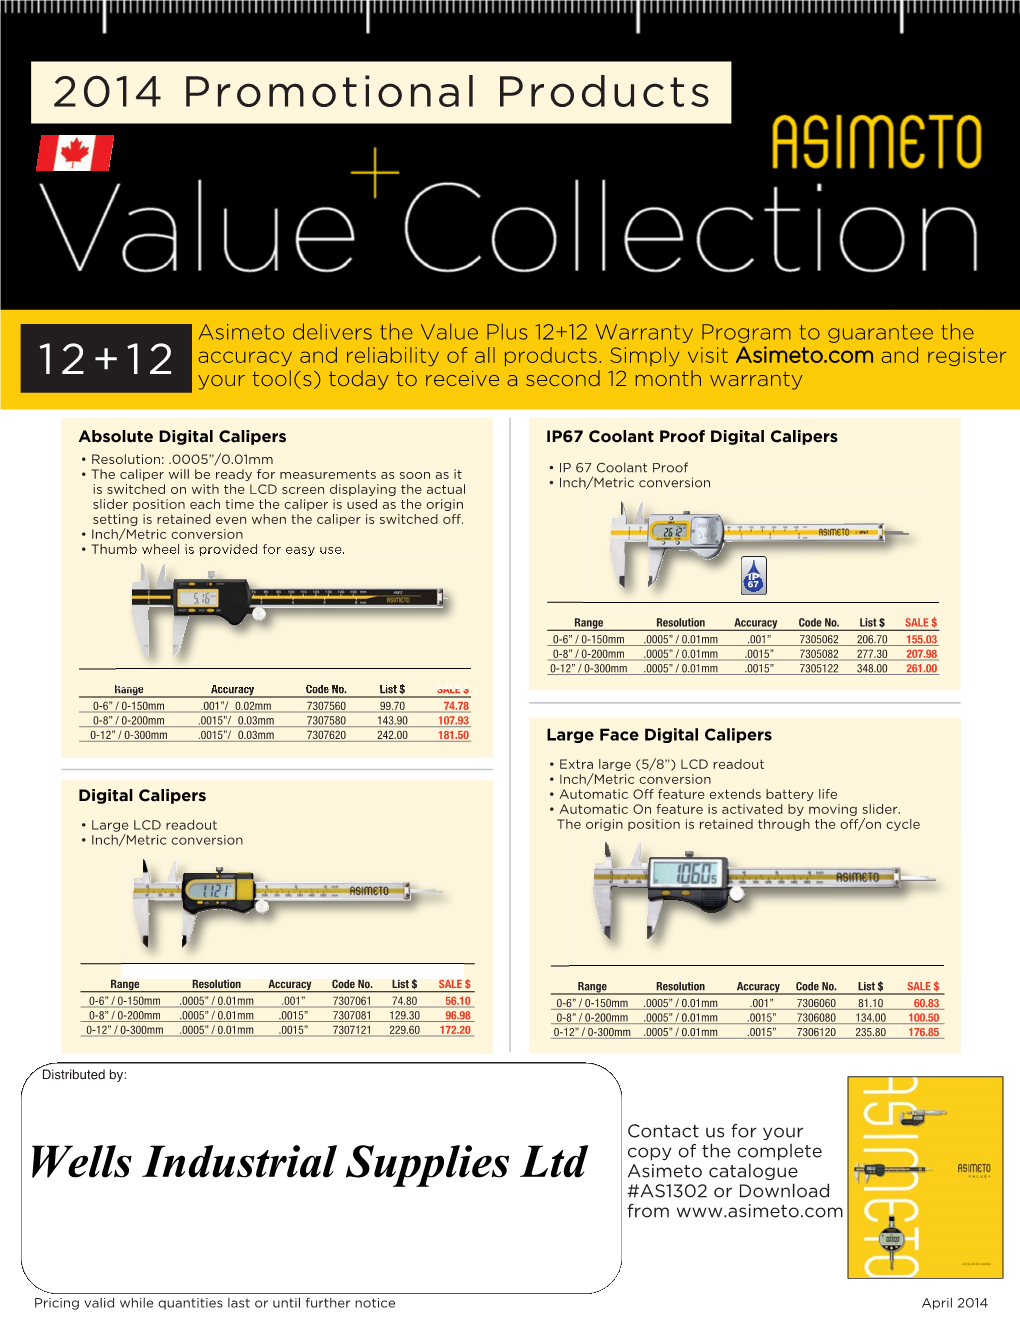 Wells Industrial Supplies Ltd Asimeto Catalogue #AS1302 Or Download From